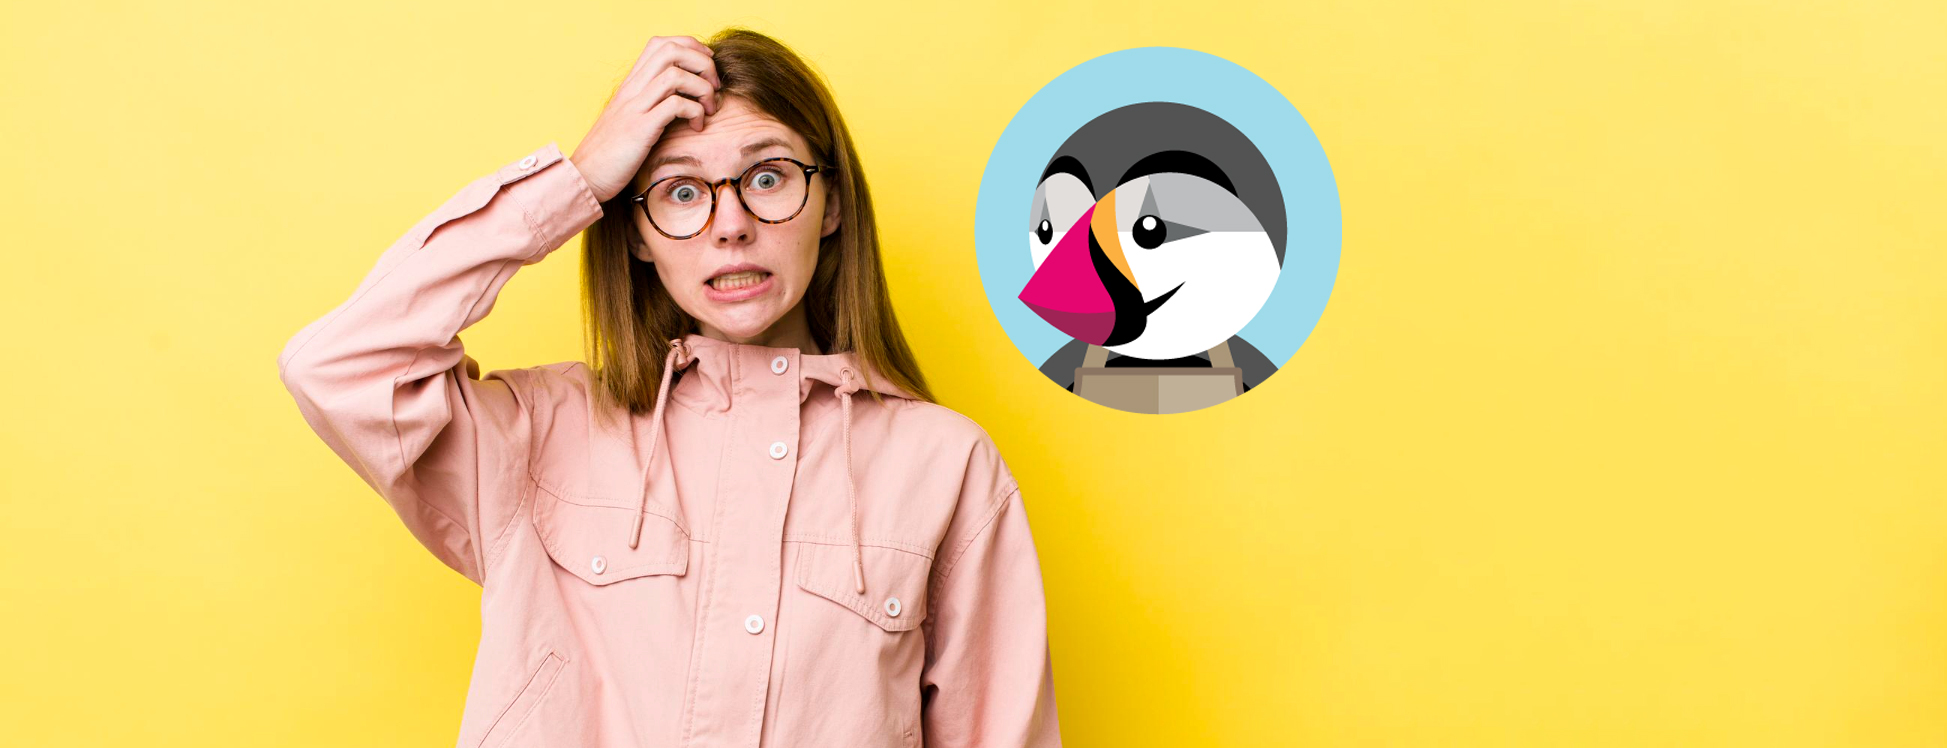 Maximize the potential of your PrestaShop store by avoiding common mistakes. Get tips on how to optimize images, keep your platform up-to-date and more.